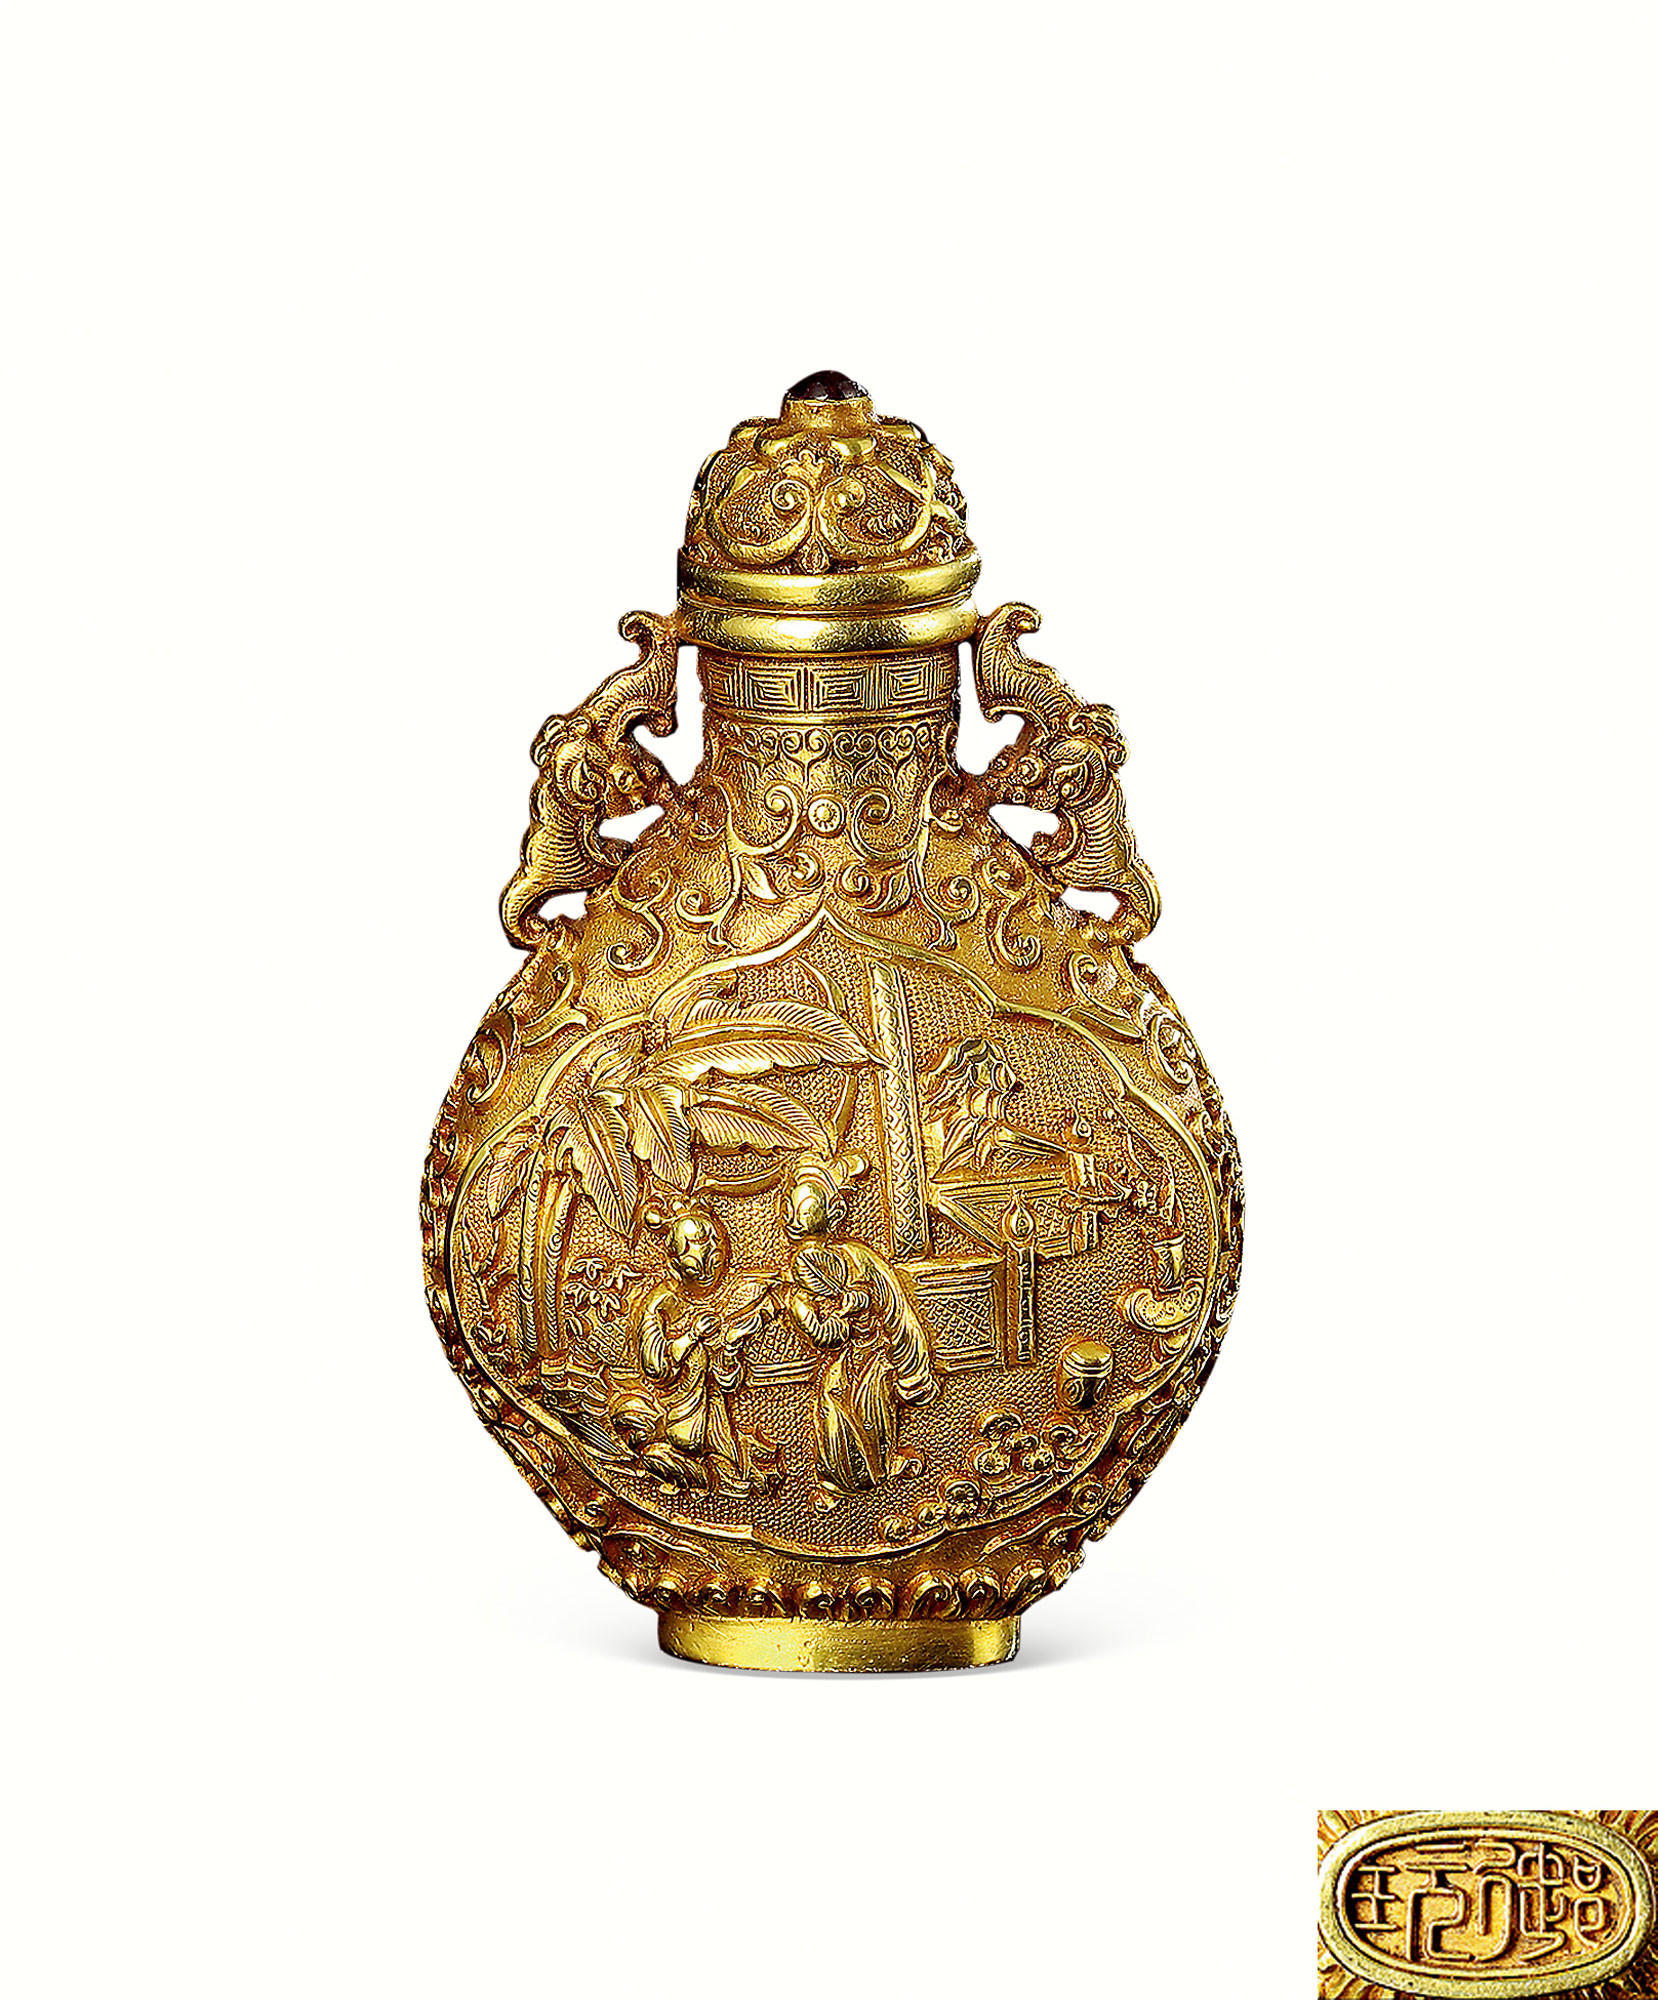 A GOLD WITH GEM-INLAID‘FIGURE AND NOVEL SCENE’SNUFF BOTTLE